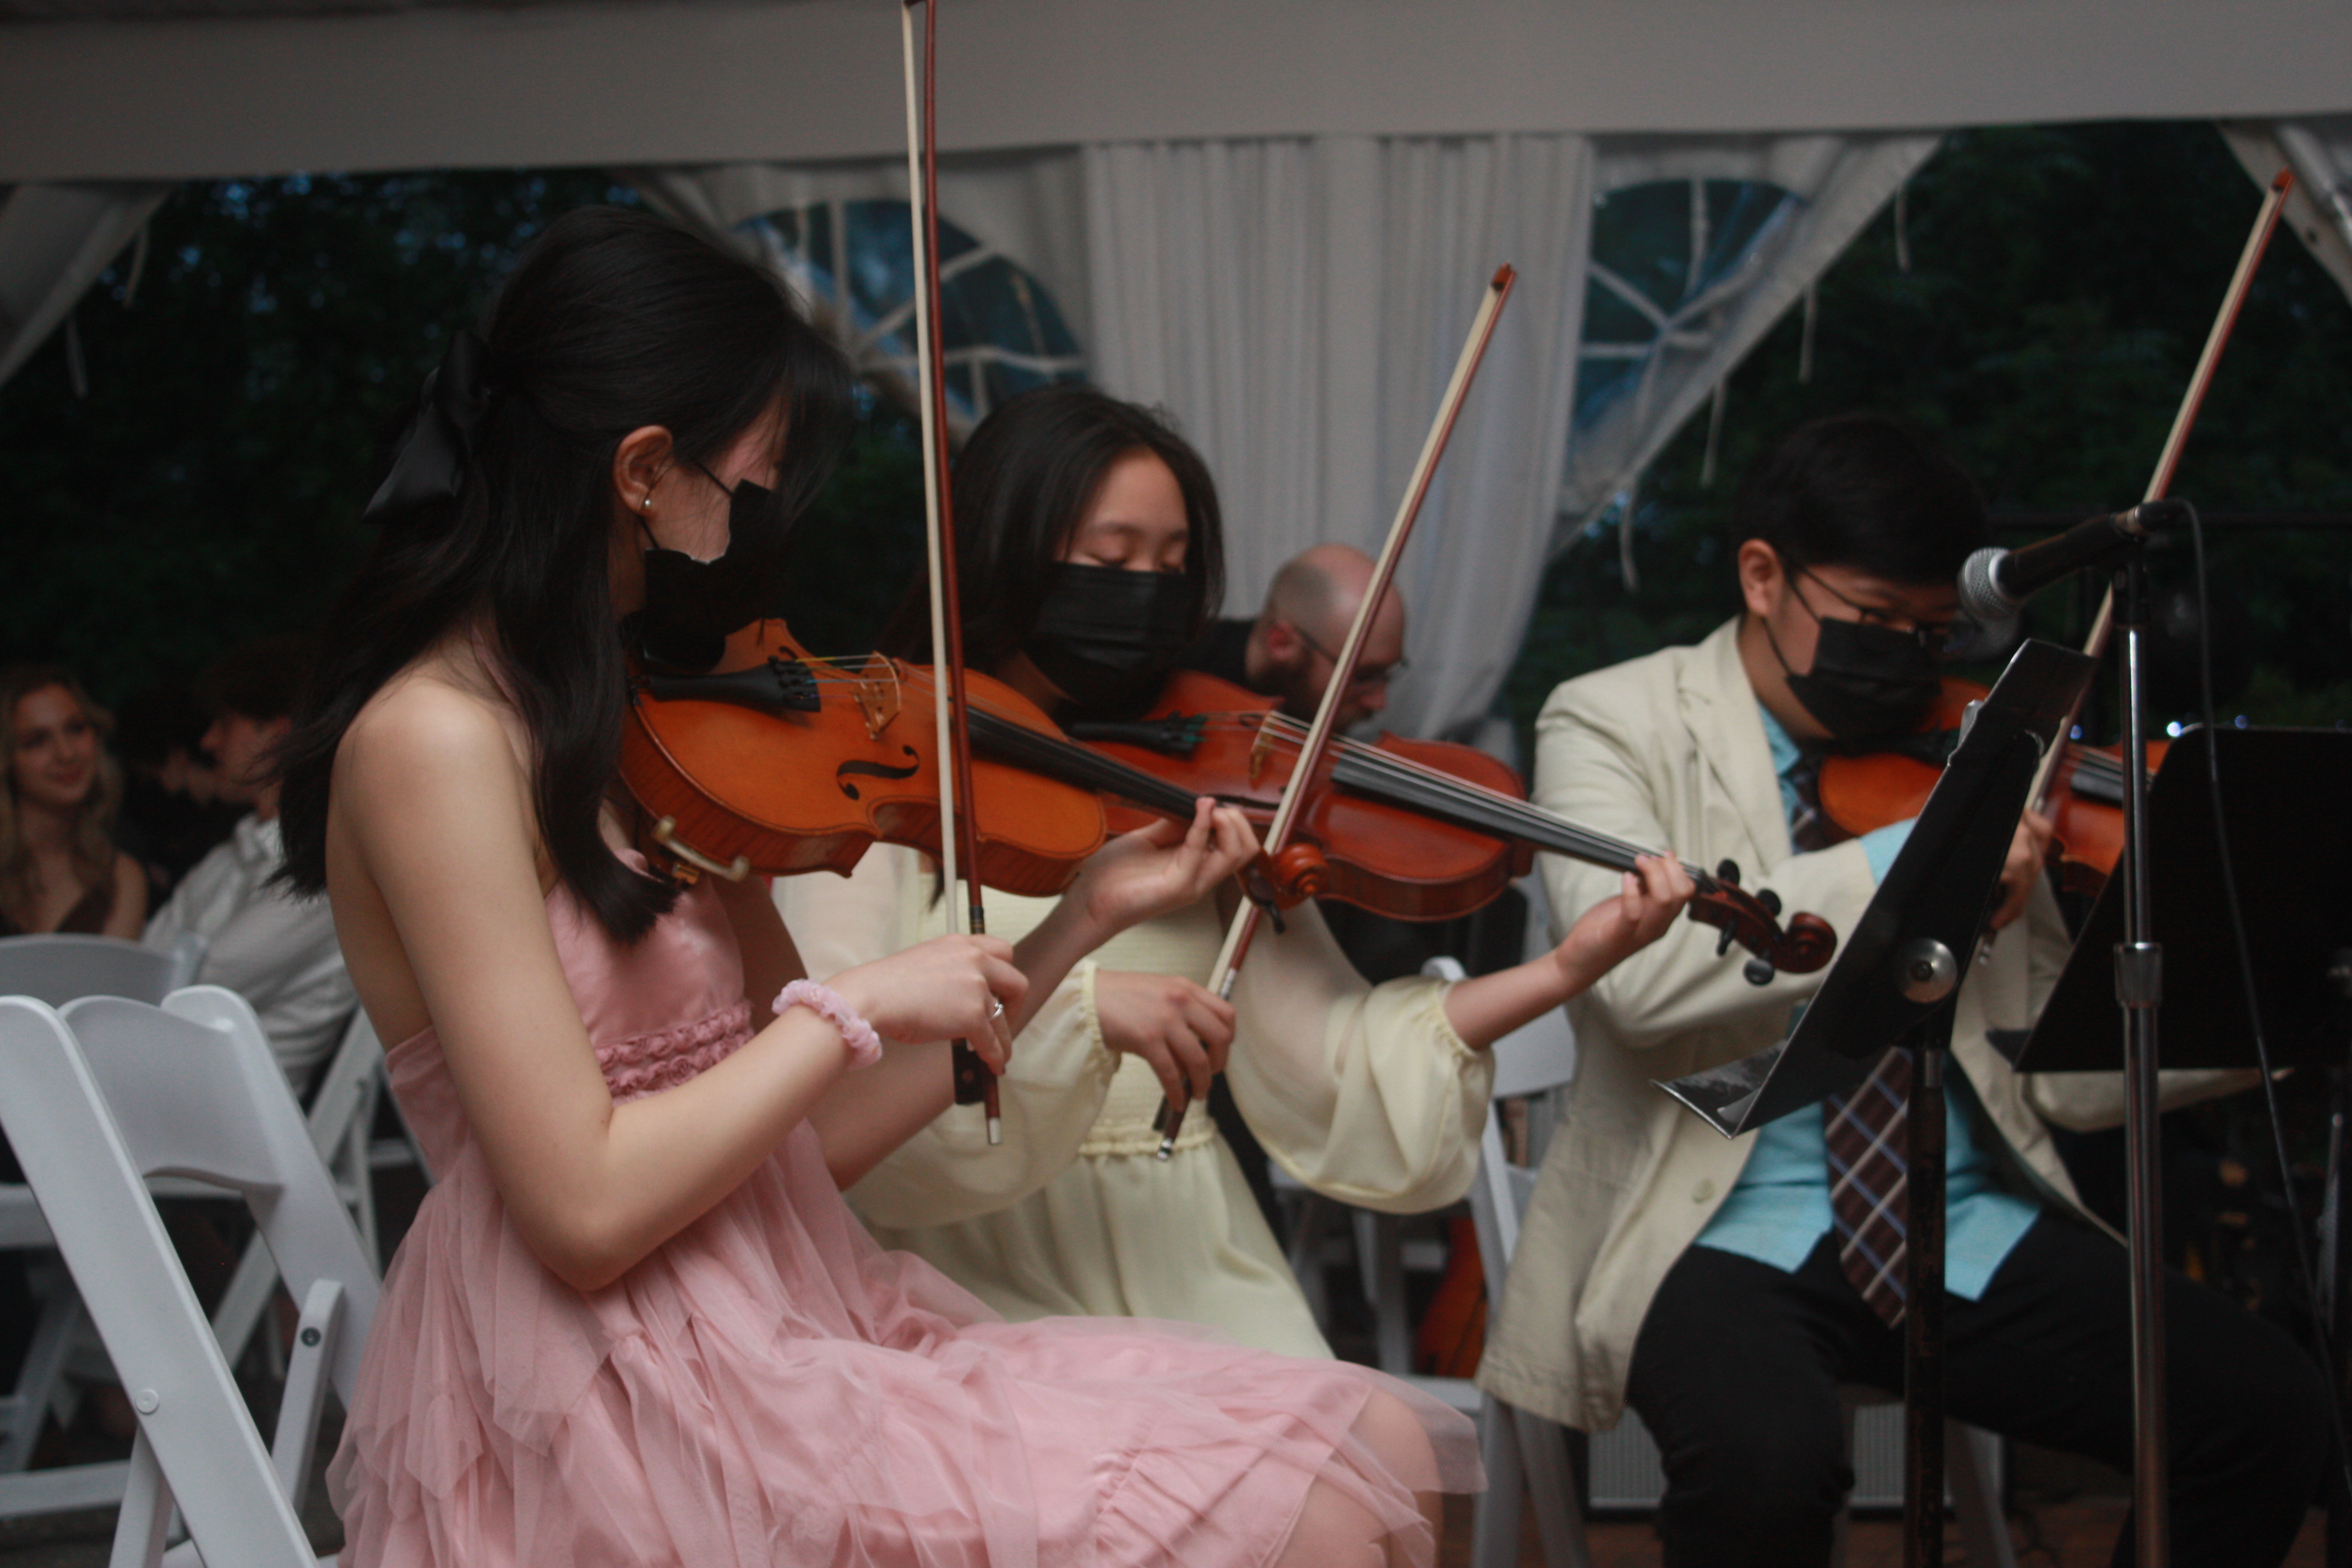 3 students playing violin at an event.